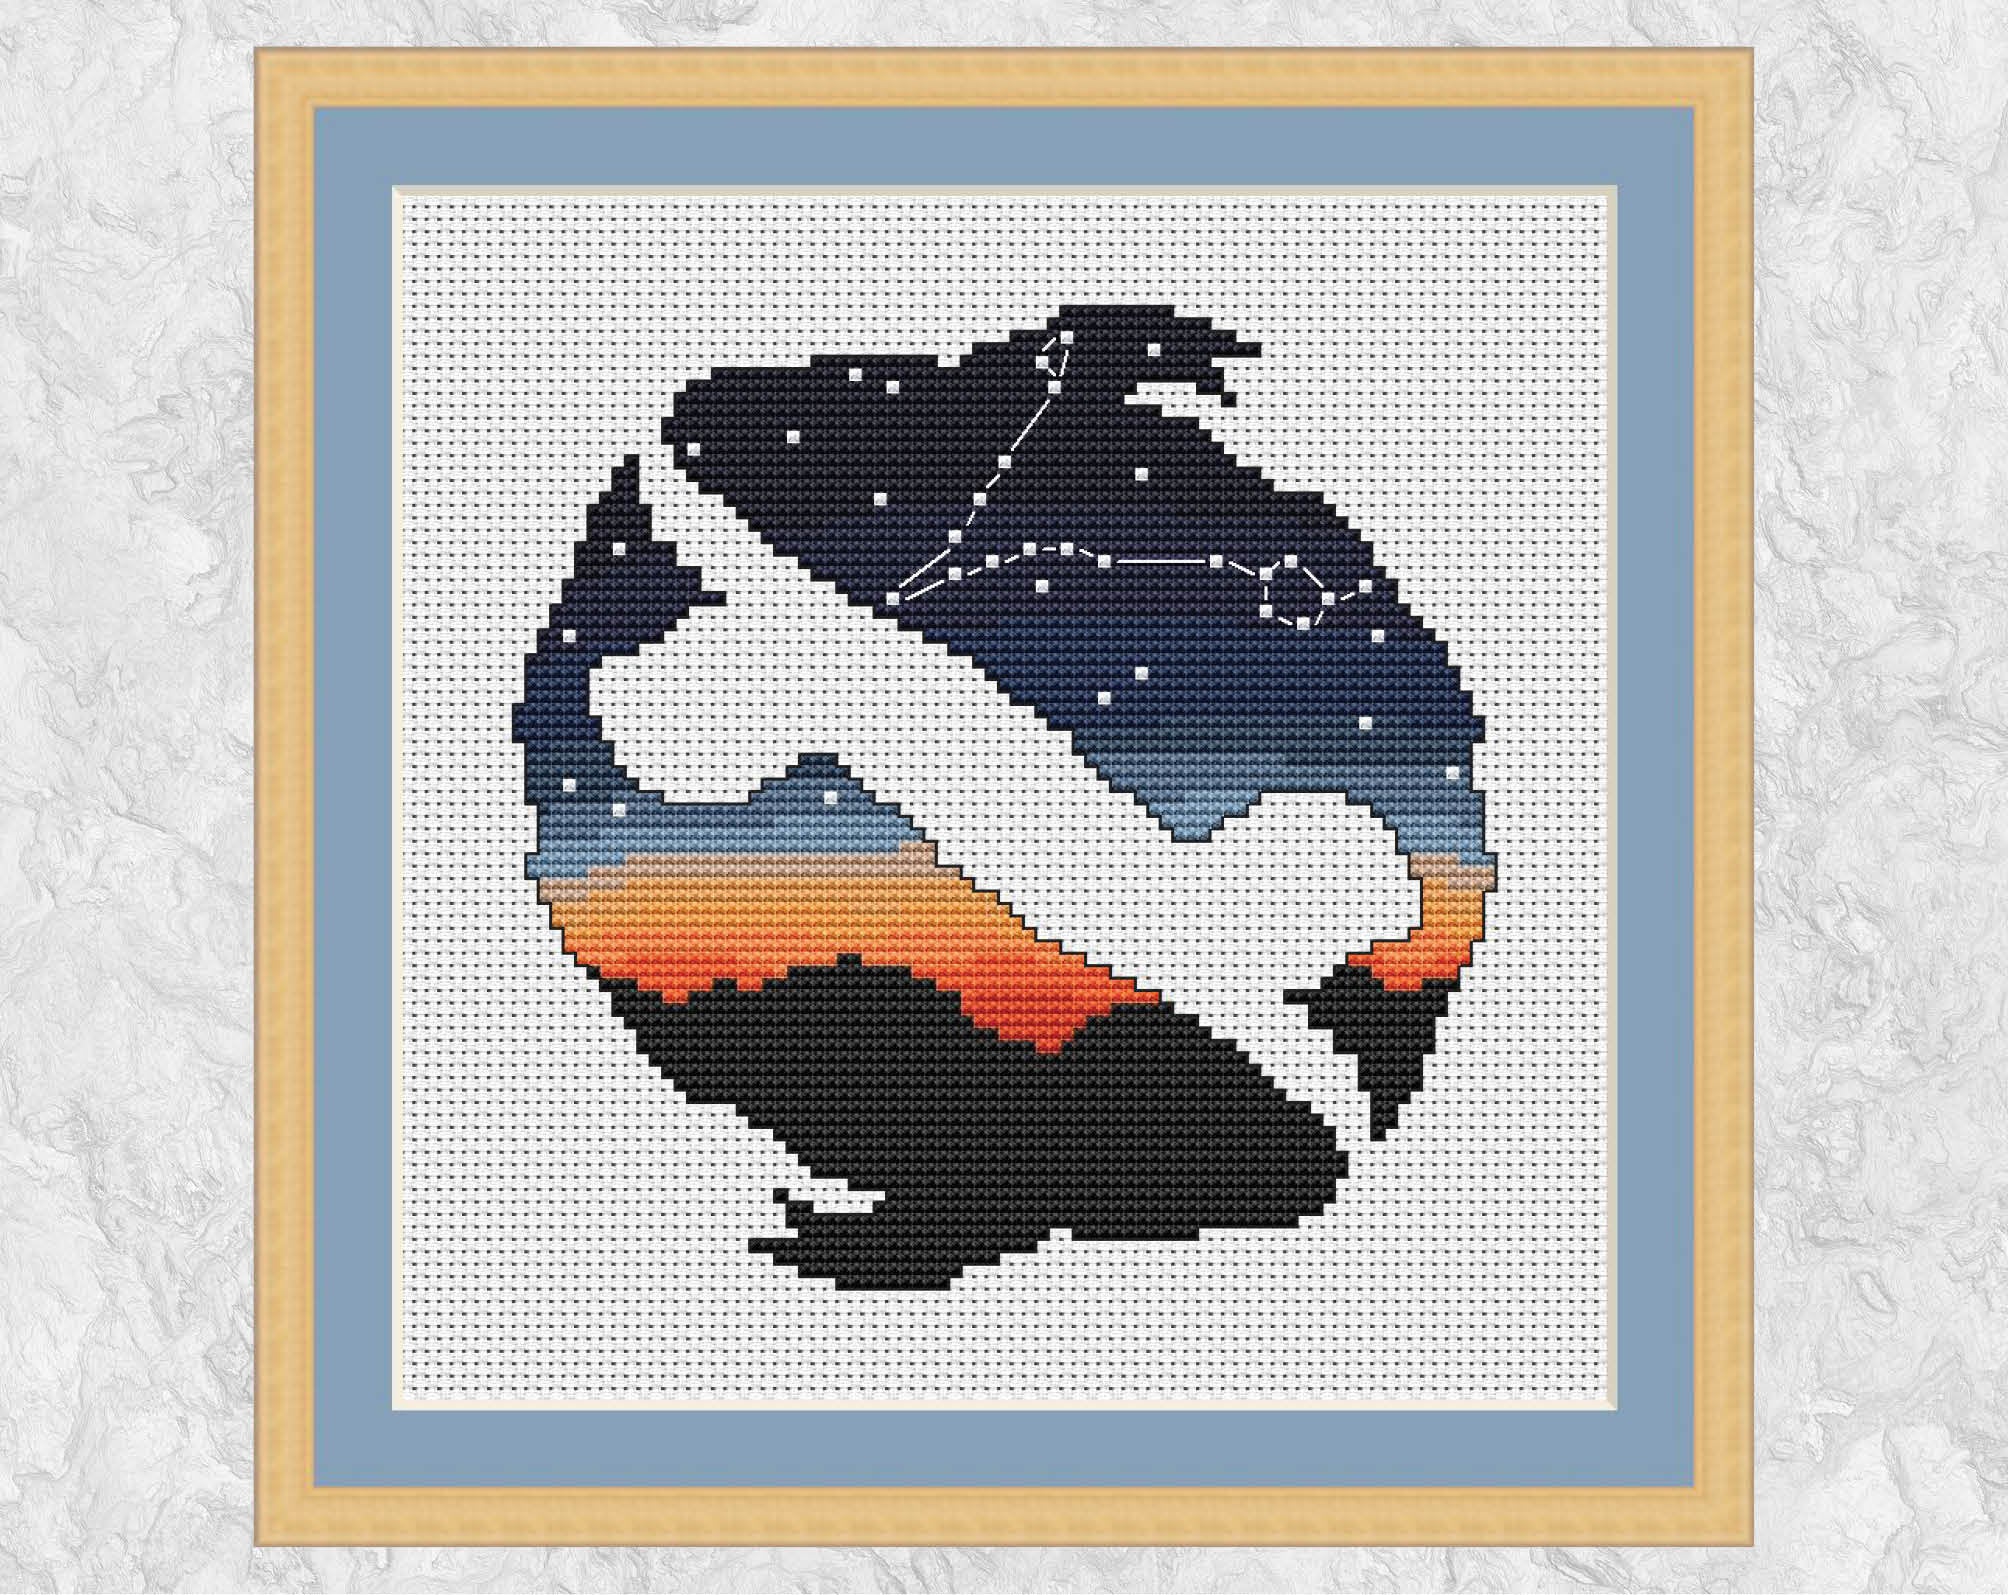 This cross stitch pattern shows the constellation of Pisces in the night sky, inside a silhouette of two fish, the symbol of Pisces. Shown with frame.